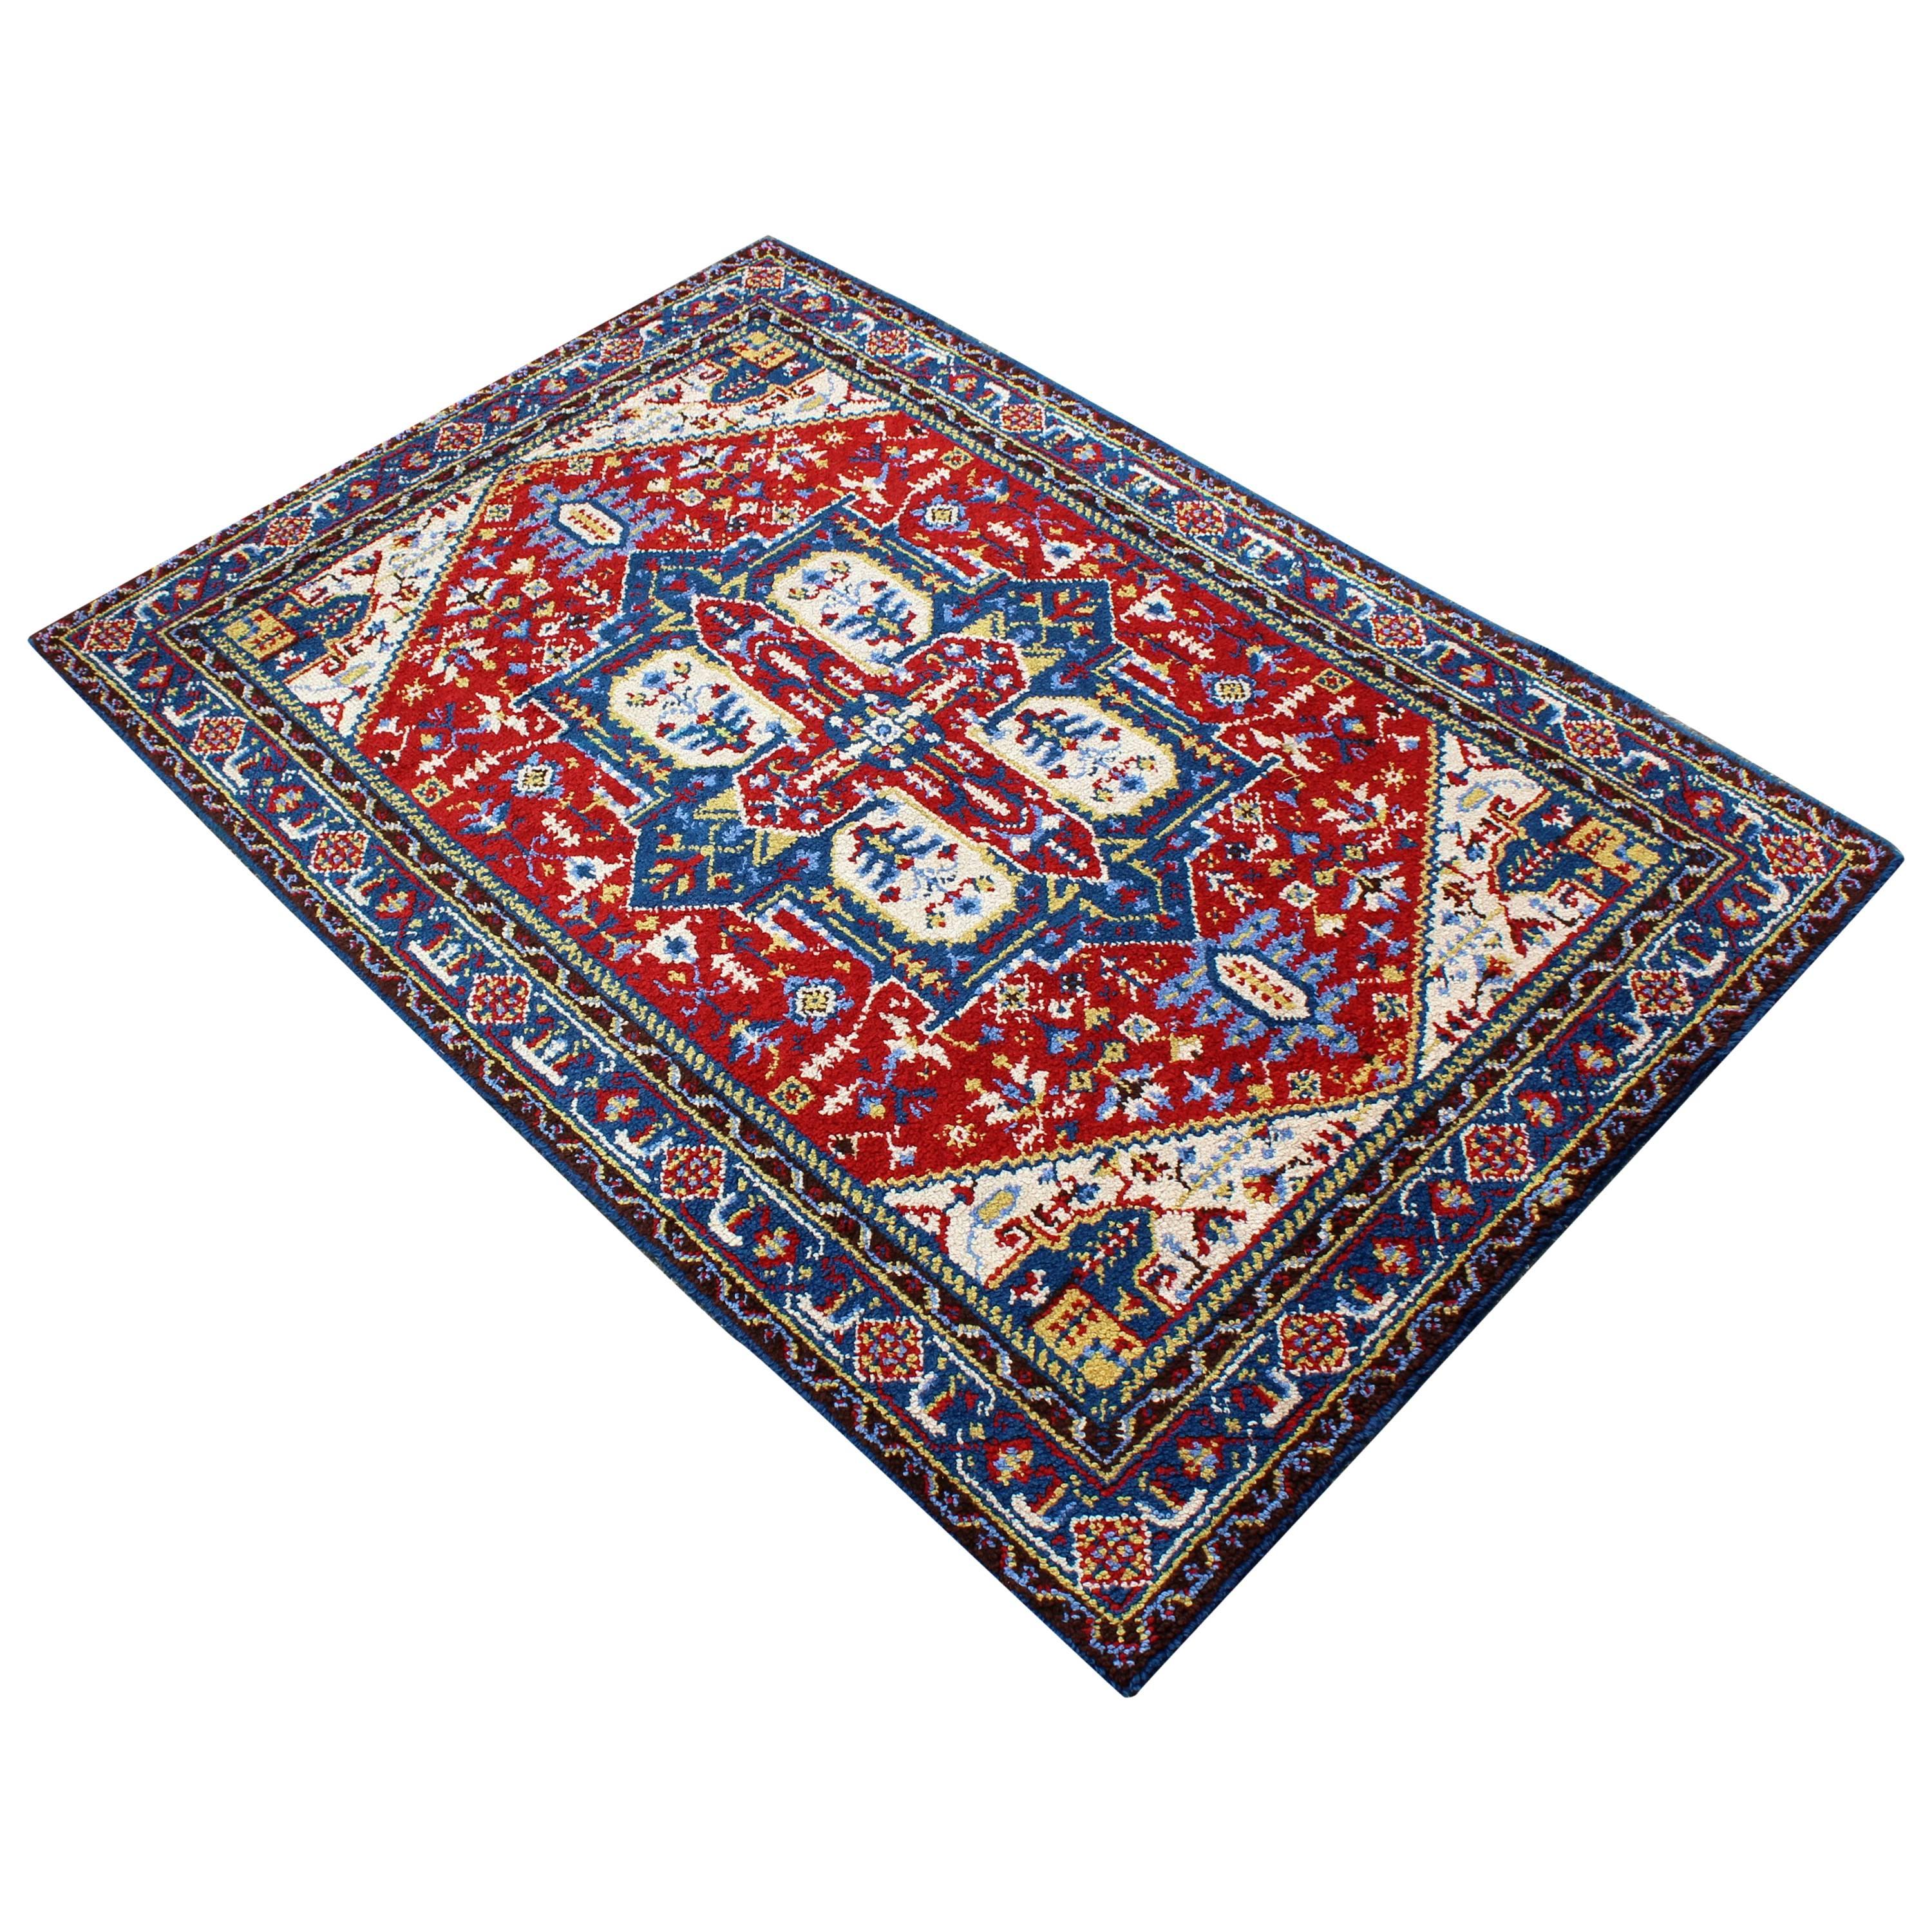 Mid-Century Modern Hand-Knotted Area Rug Carpet Swedish Style Blue Red